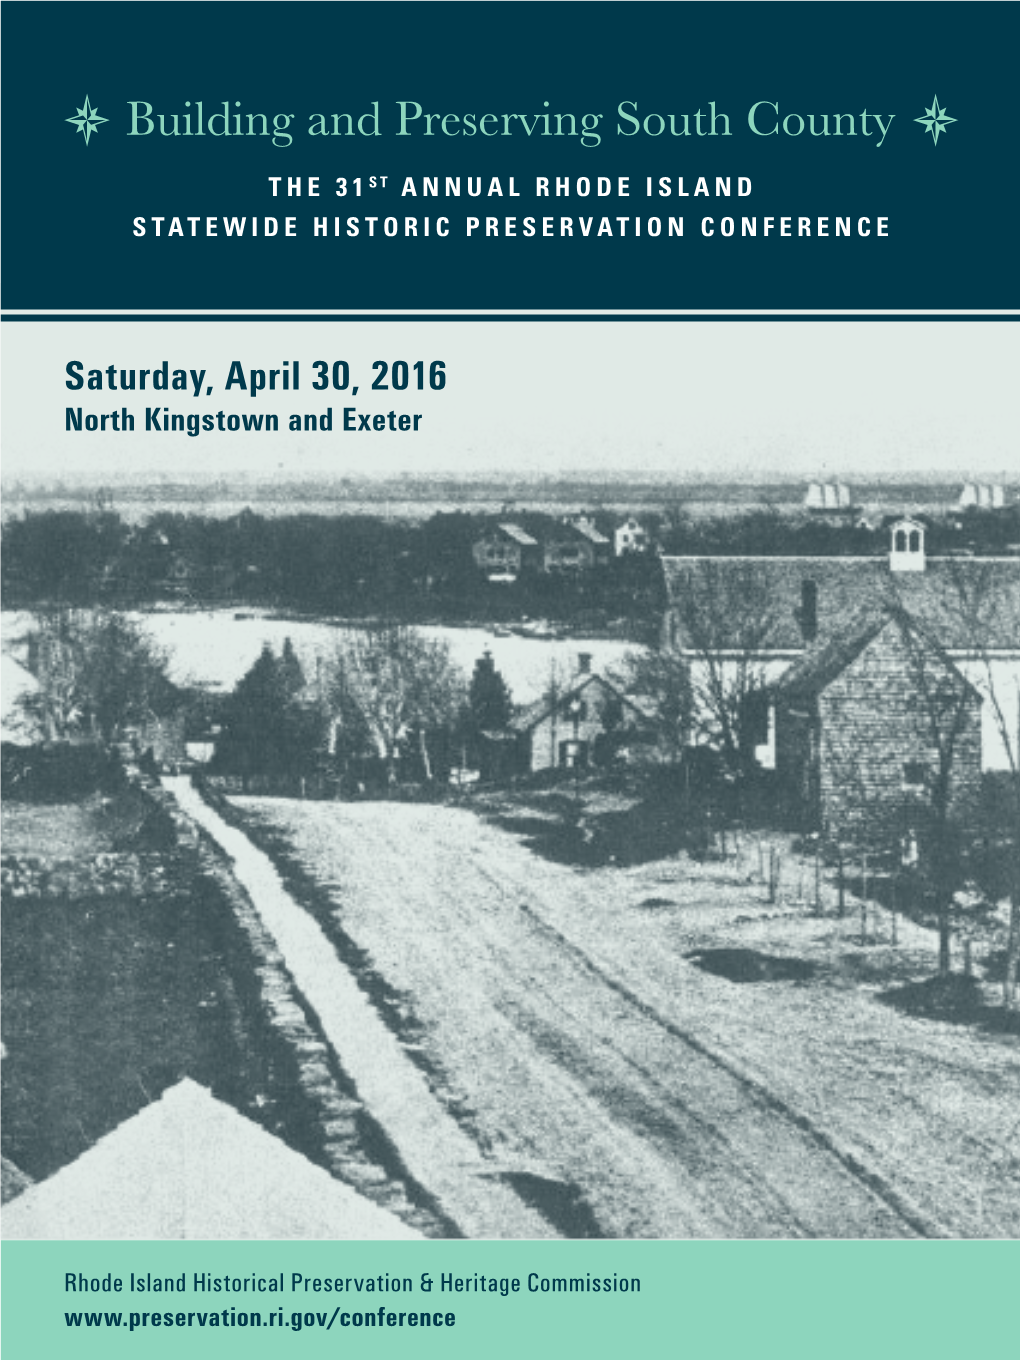 Building and Preserving South County the 31ST ANNUAL RHODE ISLAND STATEWIDE HISTORIC PRESERVATION CONFERENCE